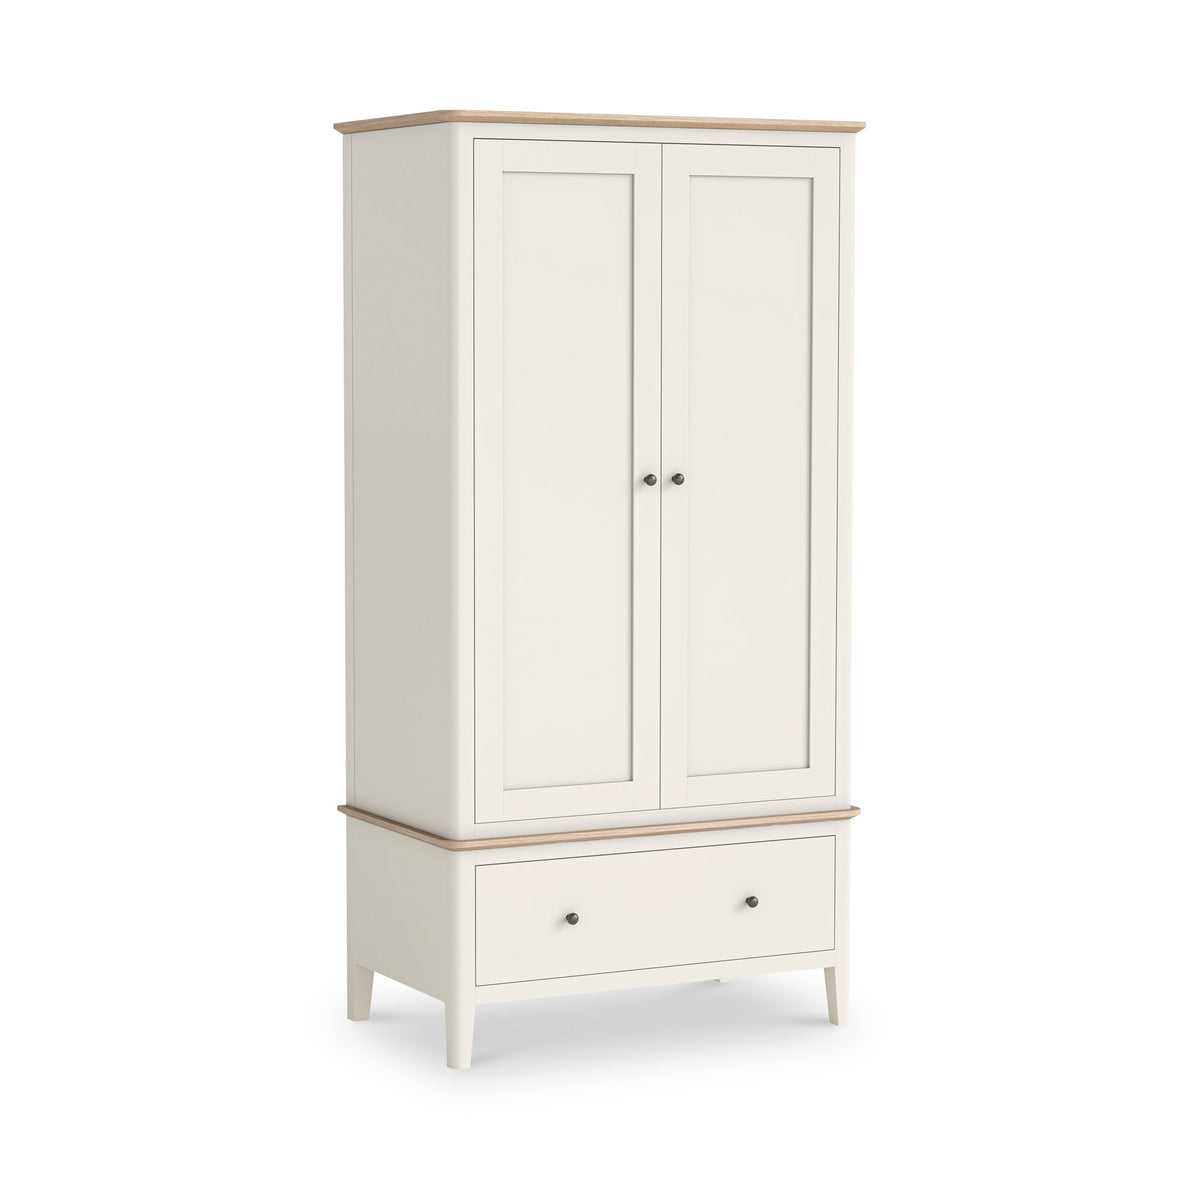 Penrose Coconut White Gents Wardrobe with metal handles from Roseland Furniture